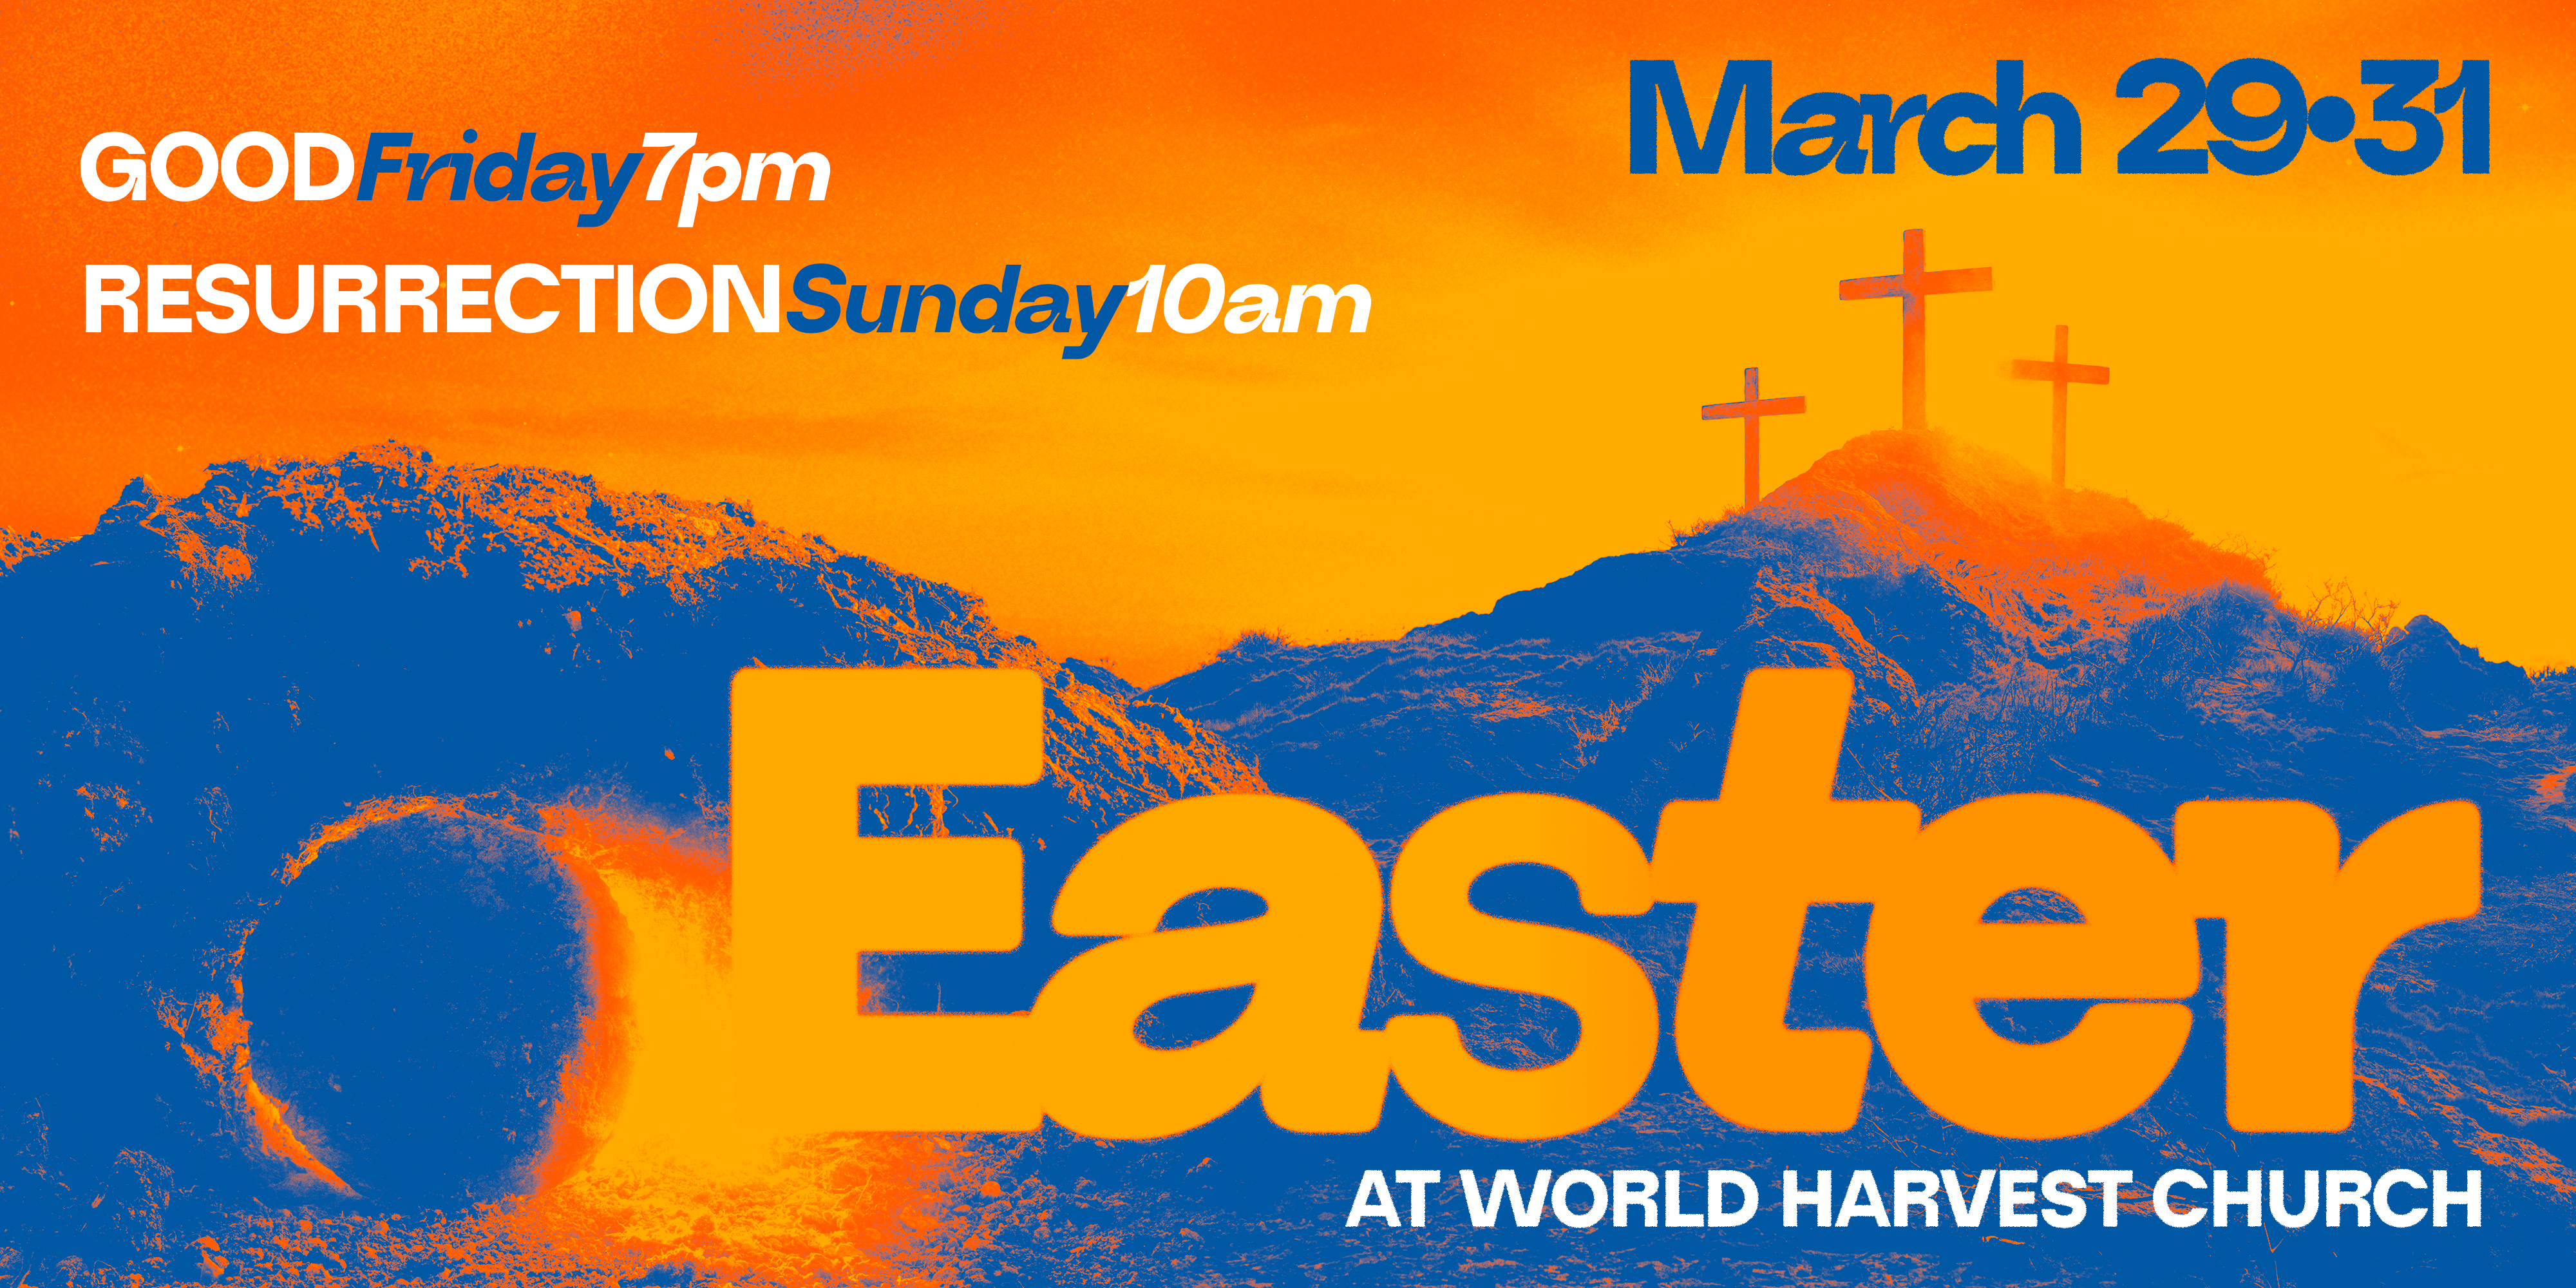 Good Friday 7pm Resurrection Sunday 10am March 31st Easter at World Harvest Church